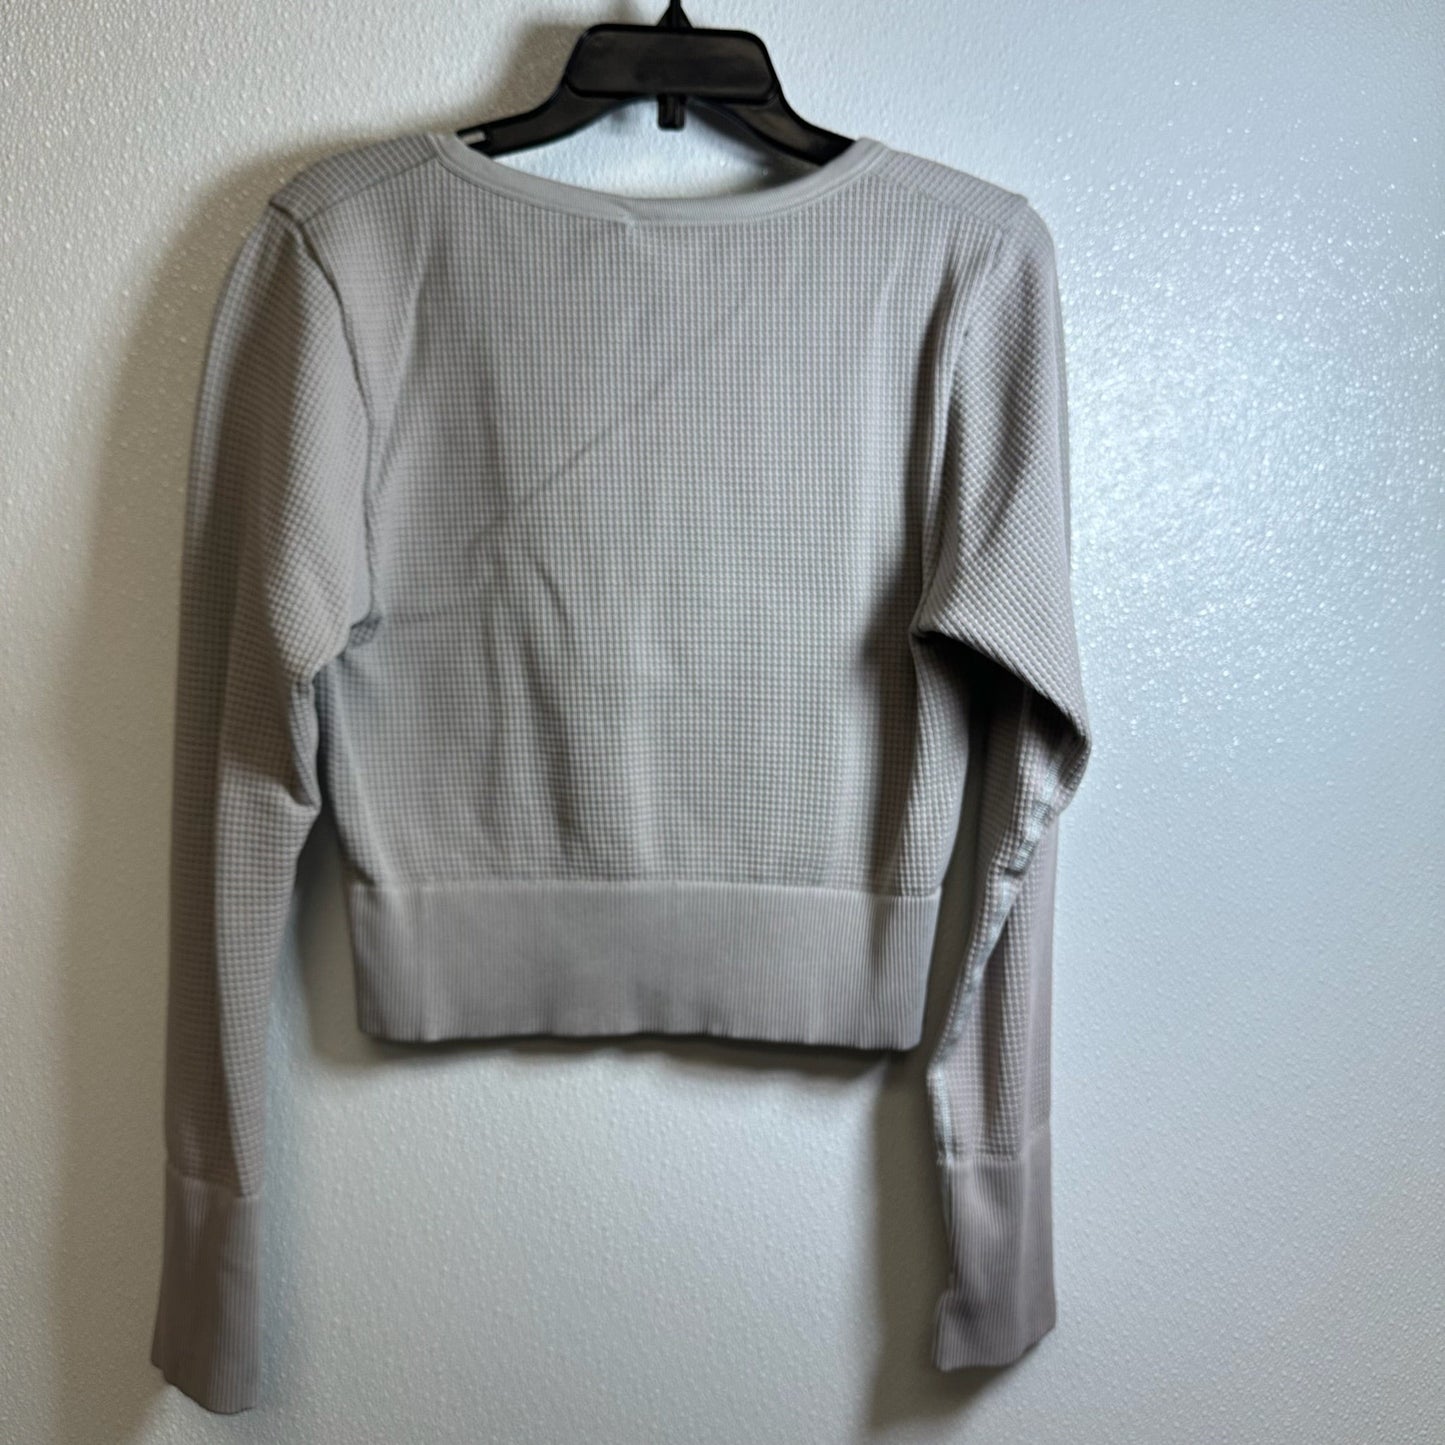 Athletic Top Long Sleeve Collar By Aerie  Size: Xxl